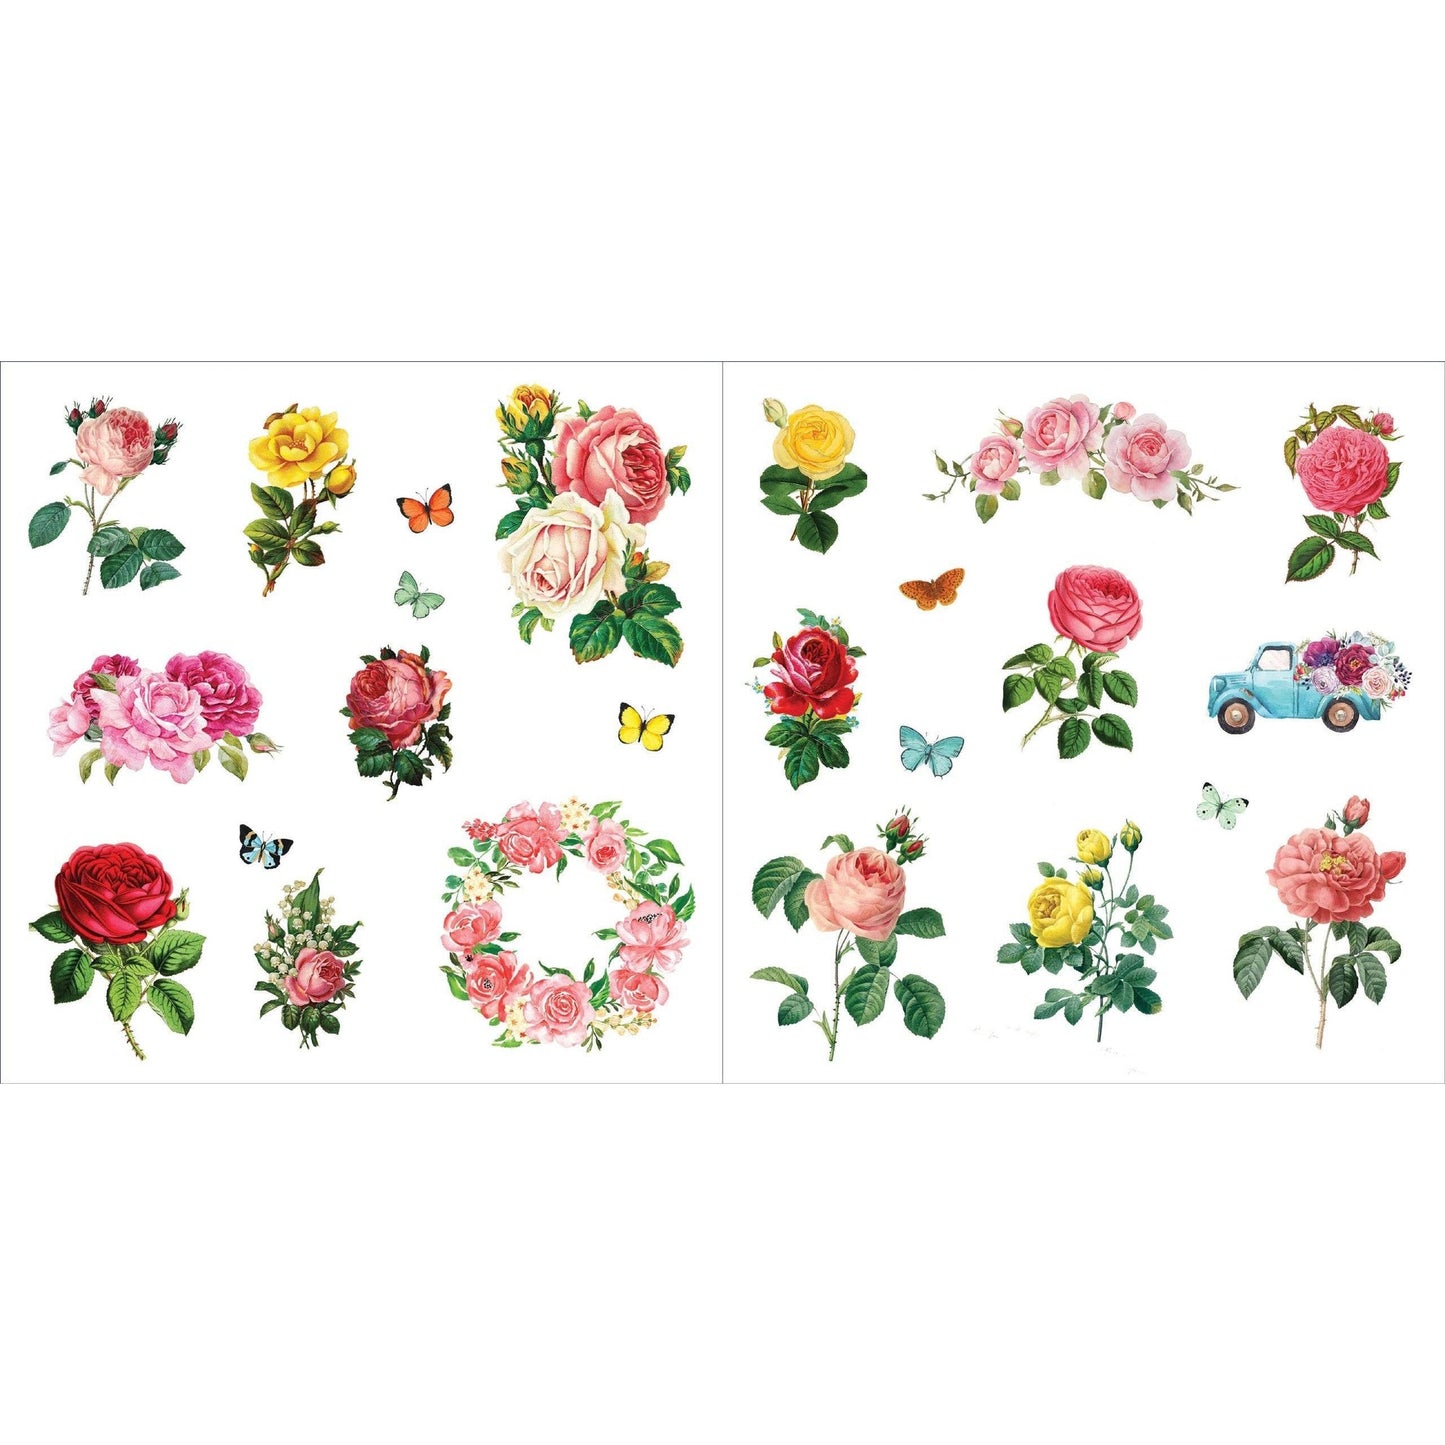 Bunches of Botanicals Decorative Stickers | A Blooming Sticker Book | Over 500 Decals